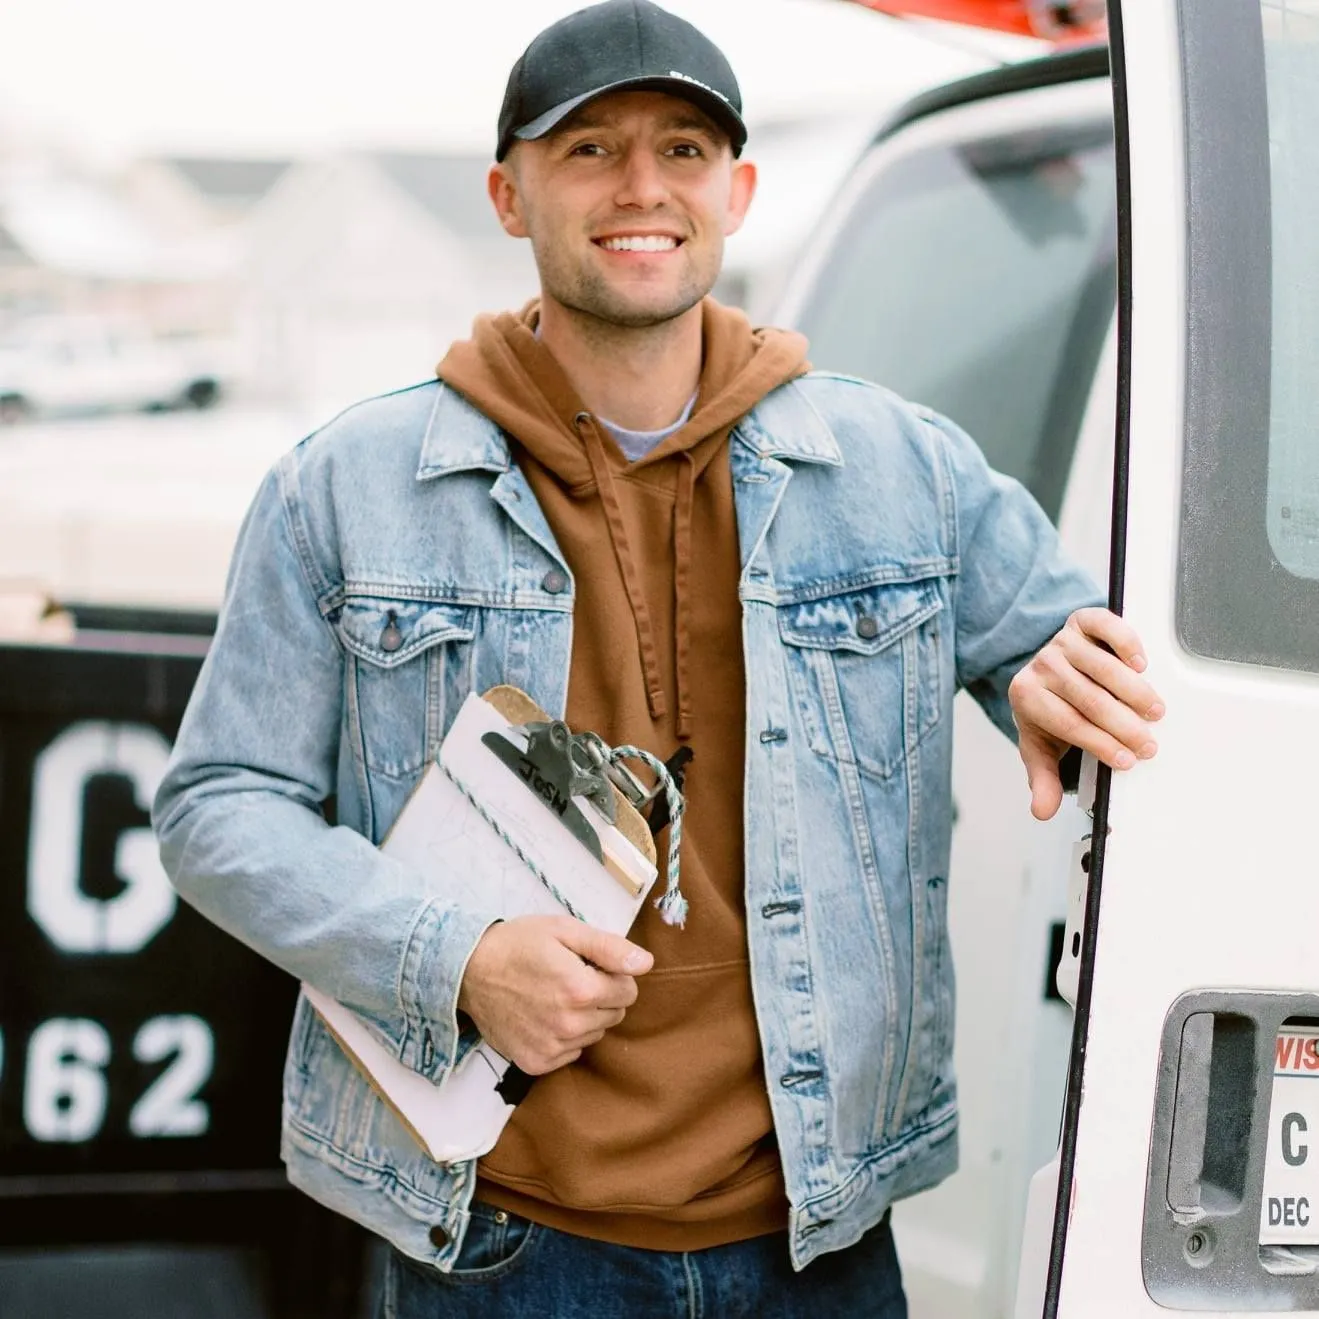 A man in a denim jacket is holding a clipboard in front of a truck with the number 62 on it.